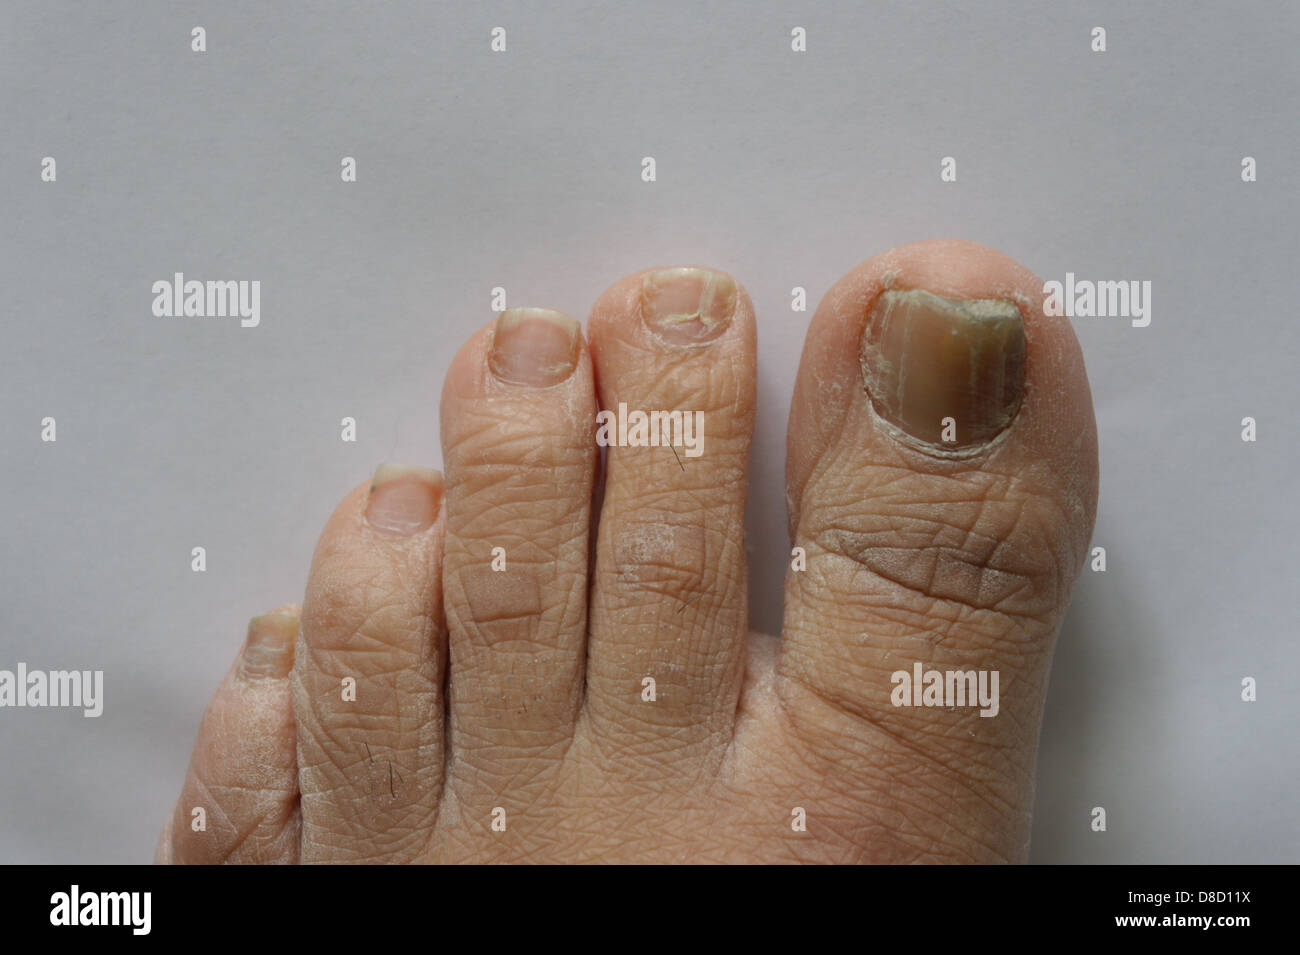 What are the different nail fungus types?